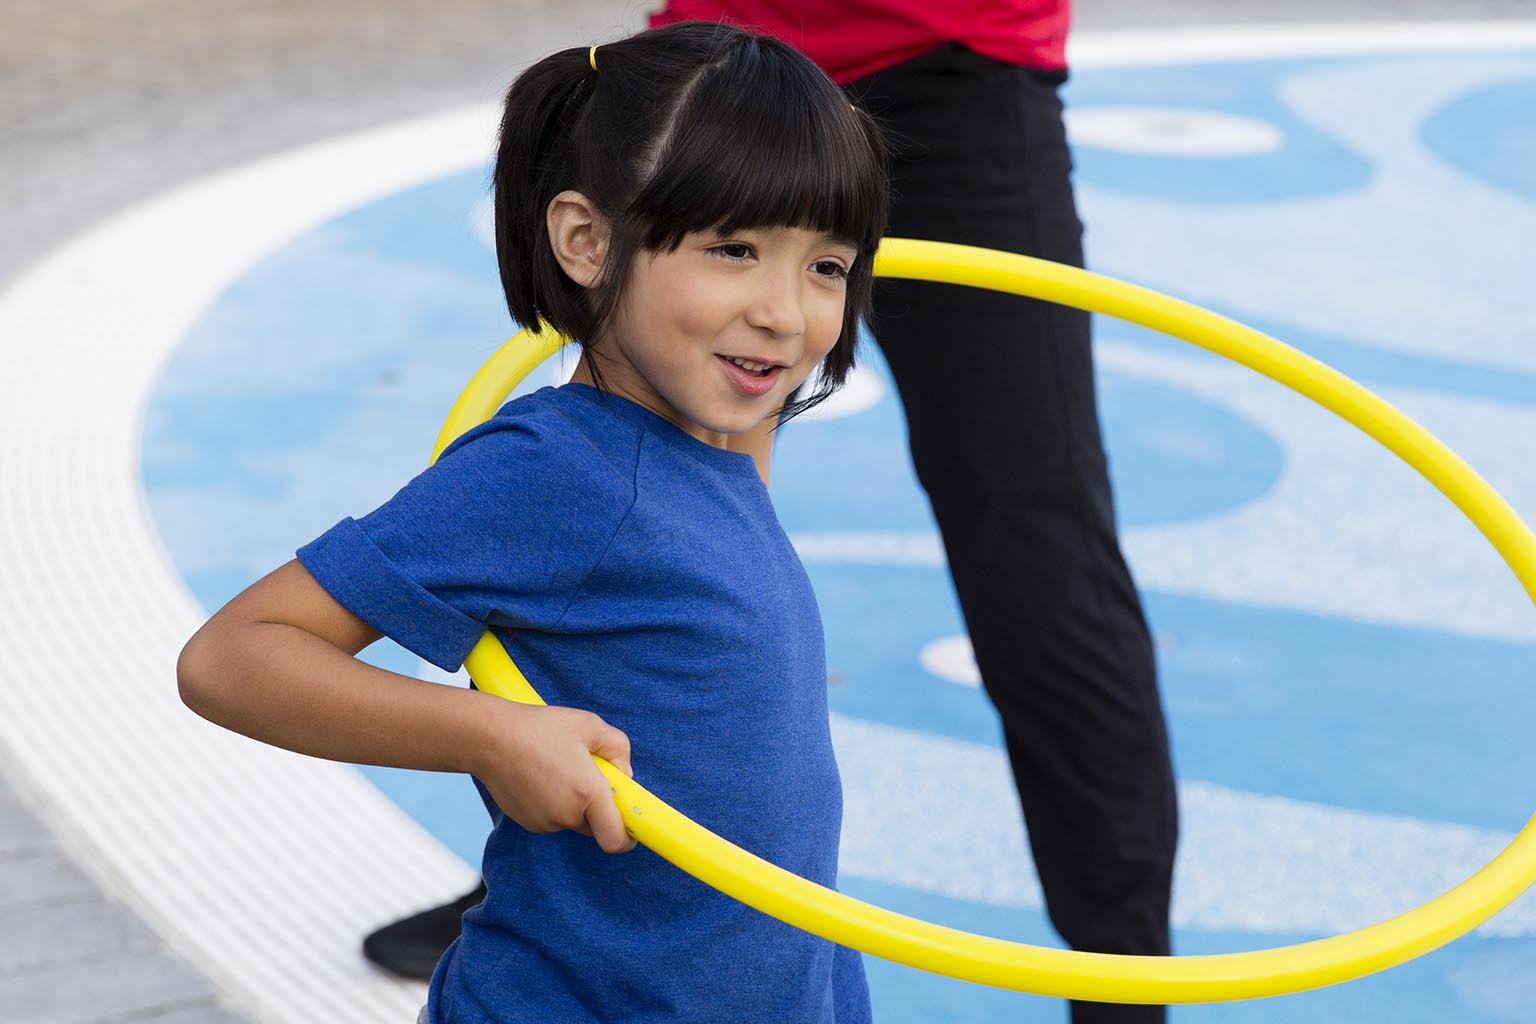 a girl in a blue shirt playing with a yellow hula hoop